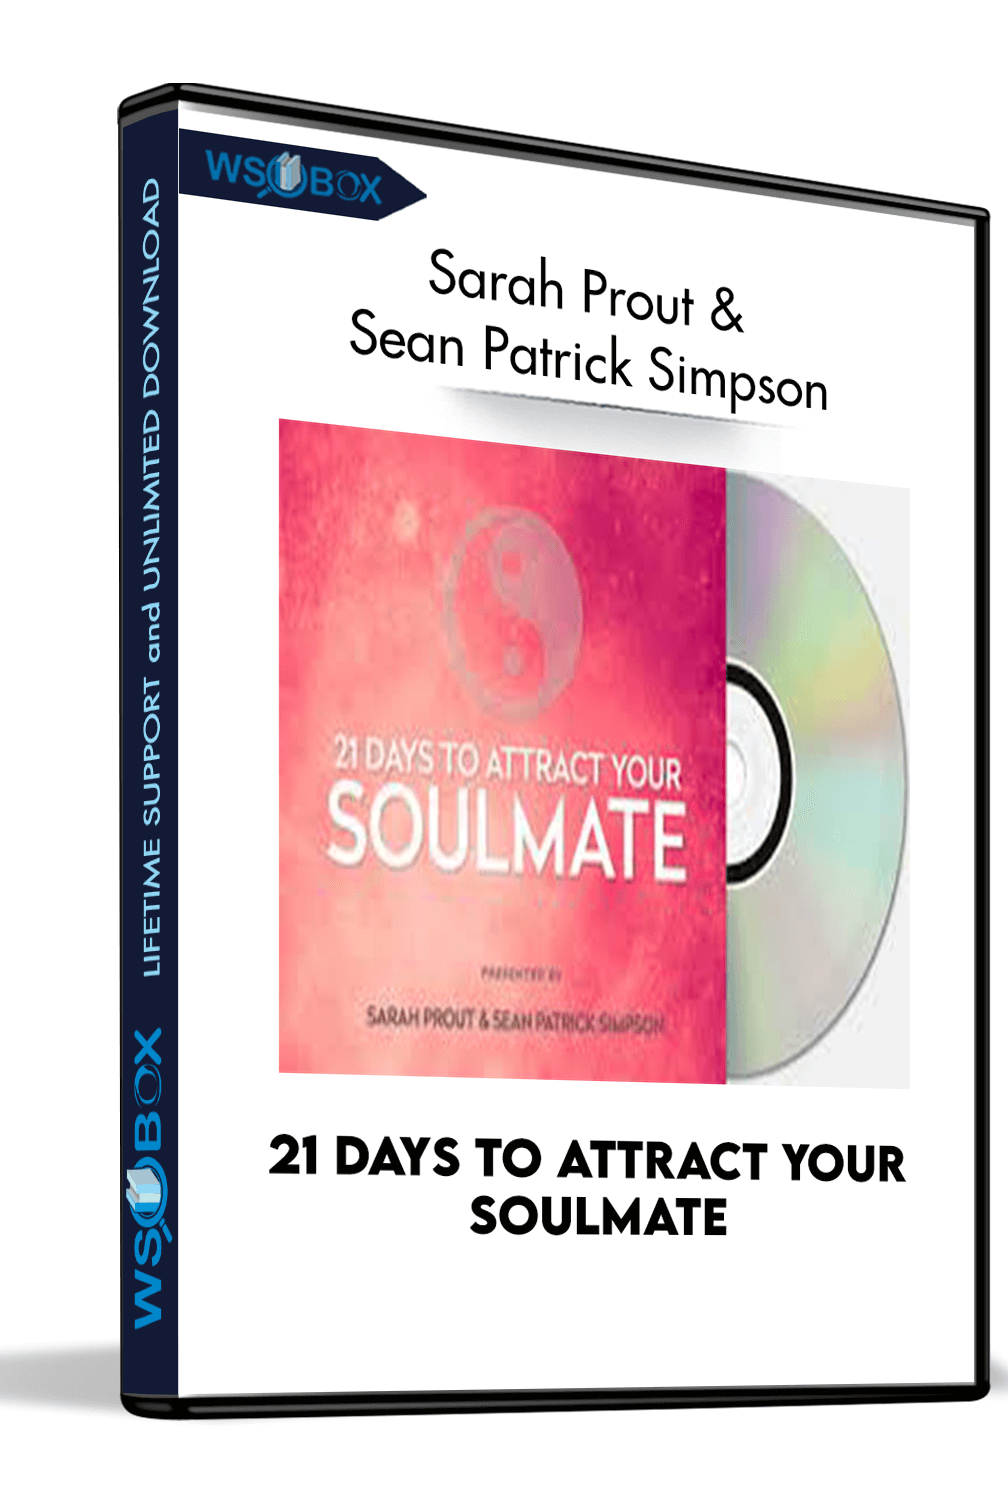 21 Days to Attract Your Soulmate – Sarah Prout and Sean Patrick Simpson